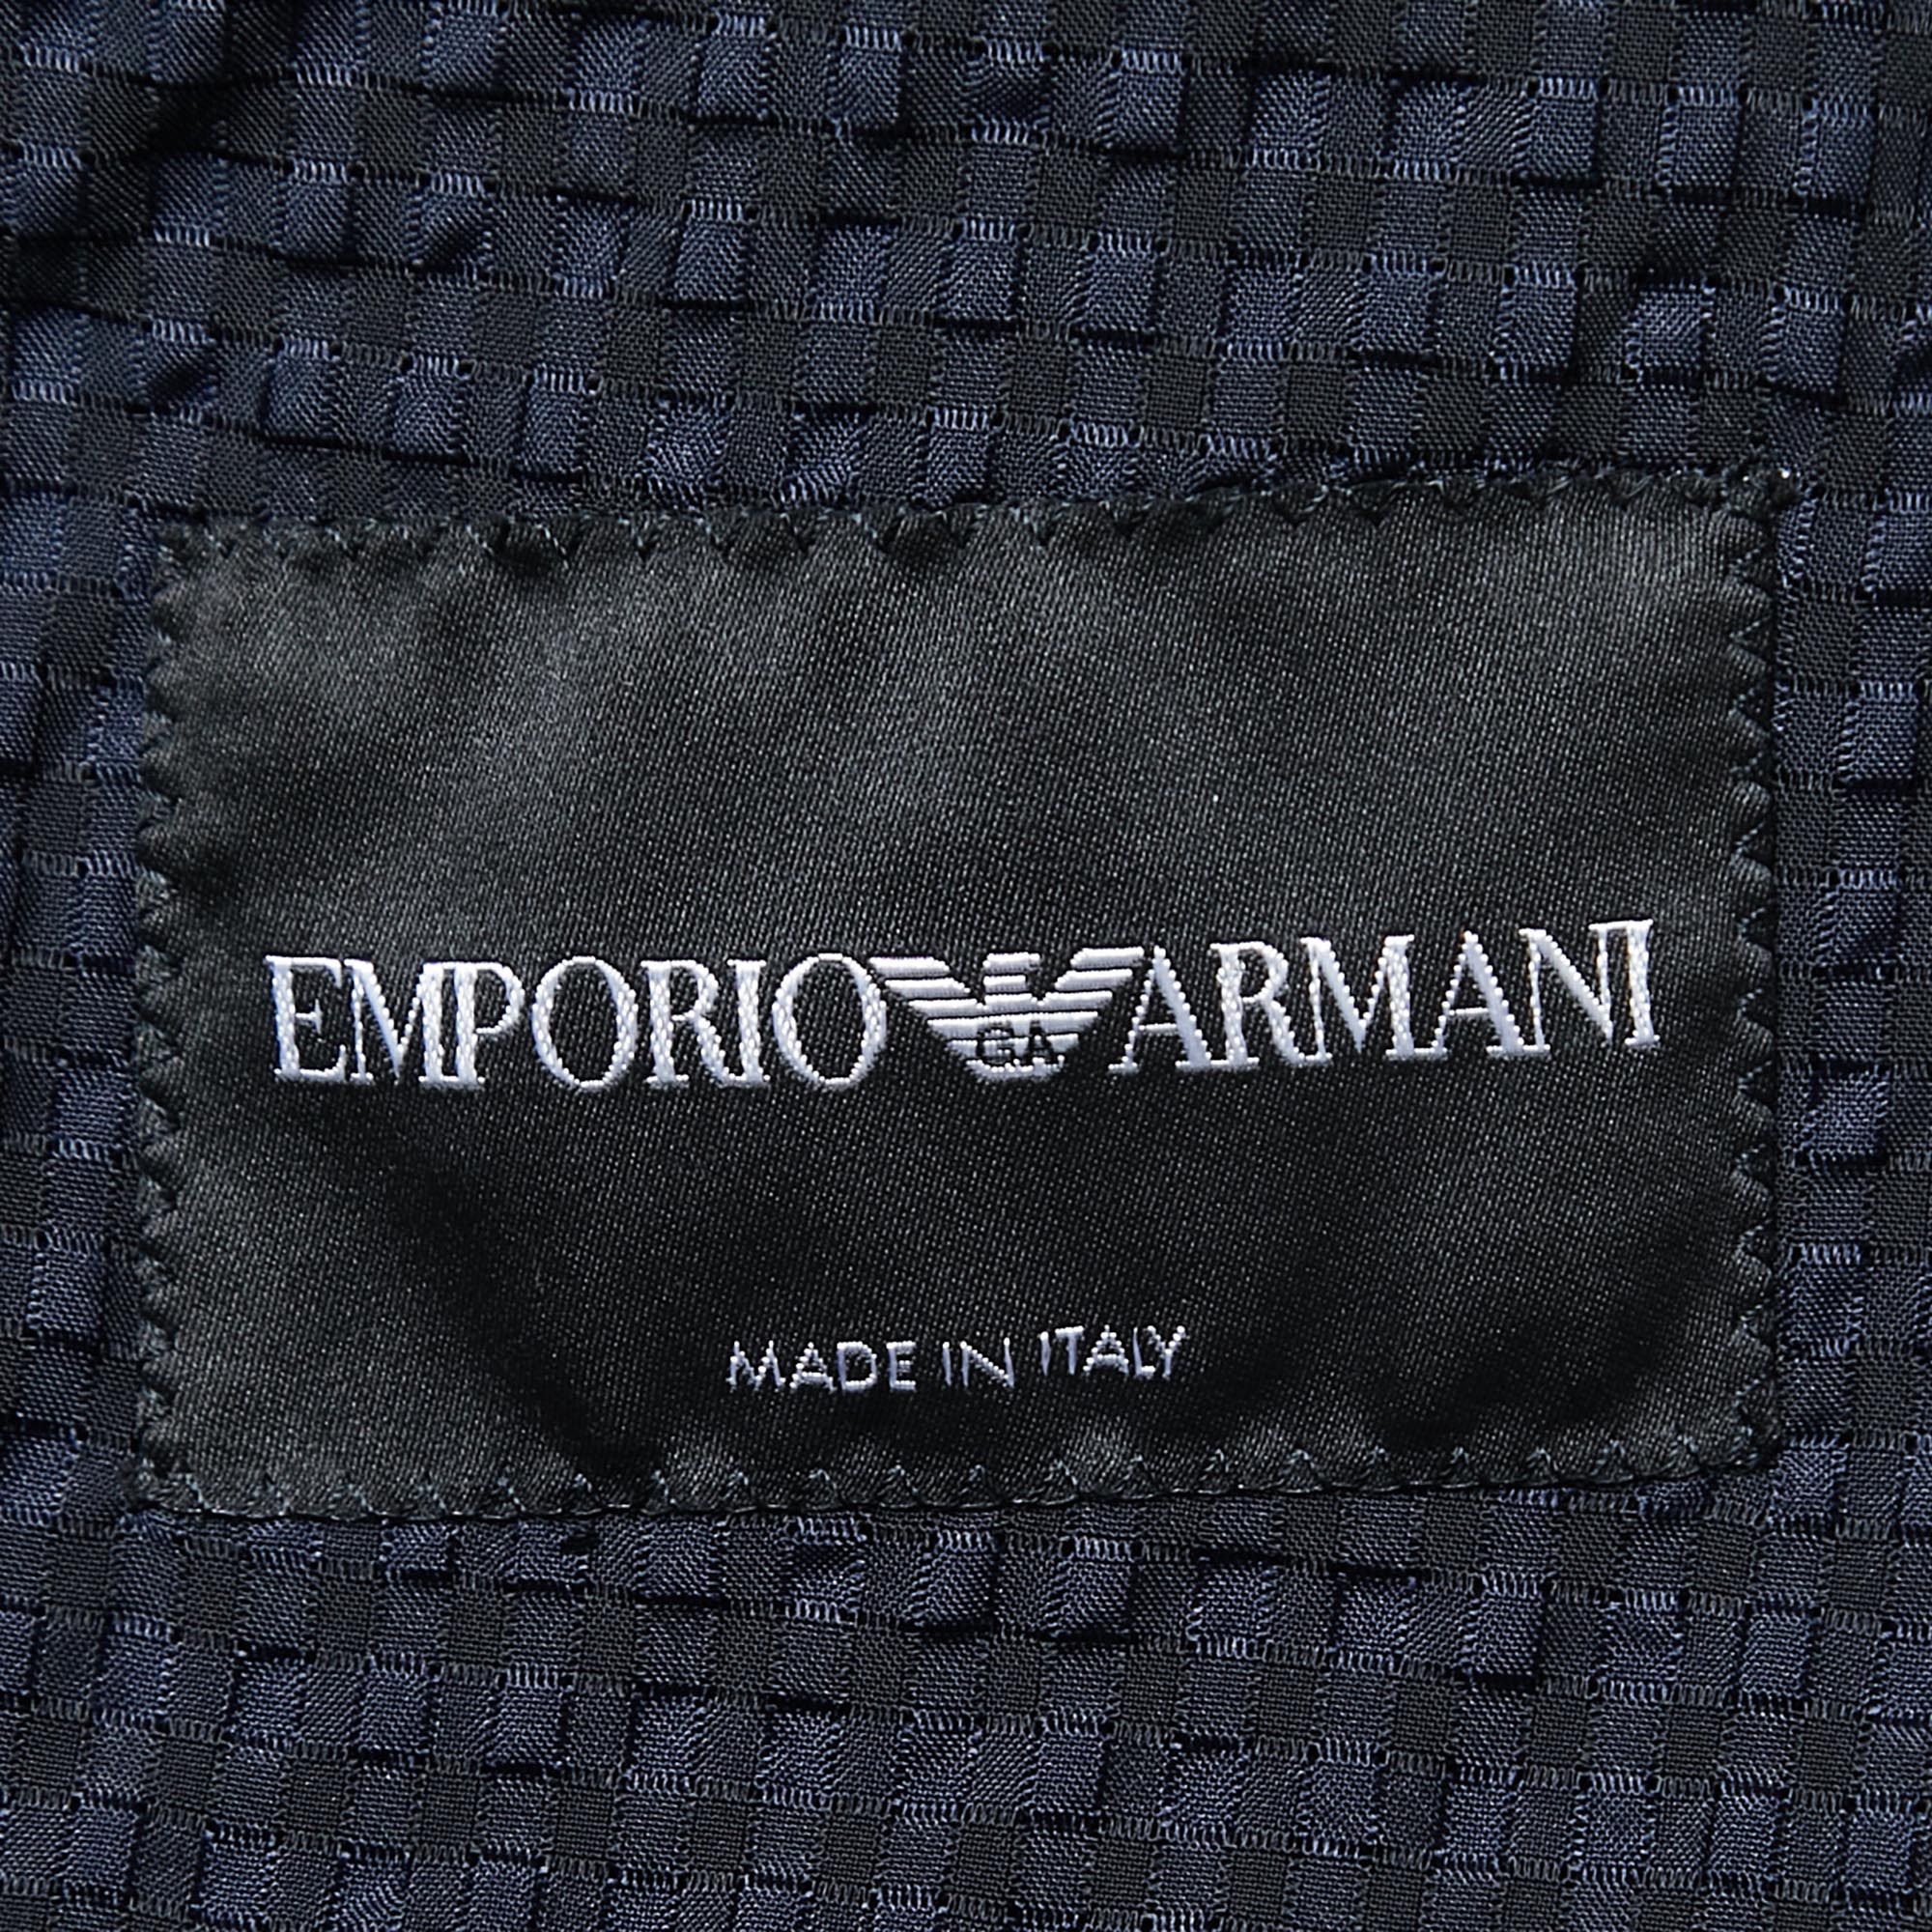 Emporio Armani Navy Blue Patterned Synthetic Single Breasted Blazer XL